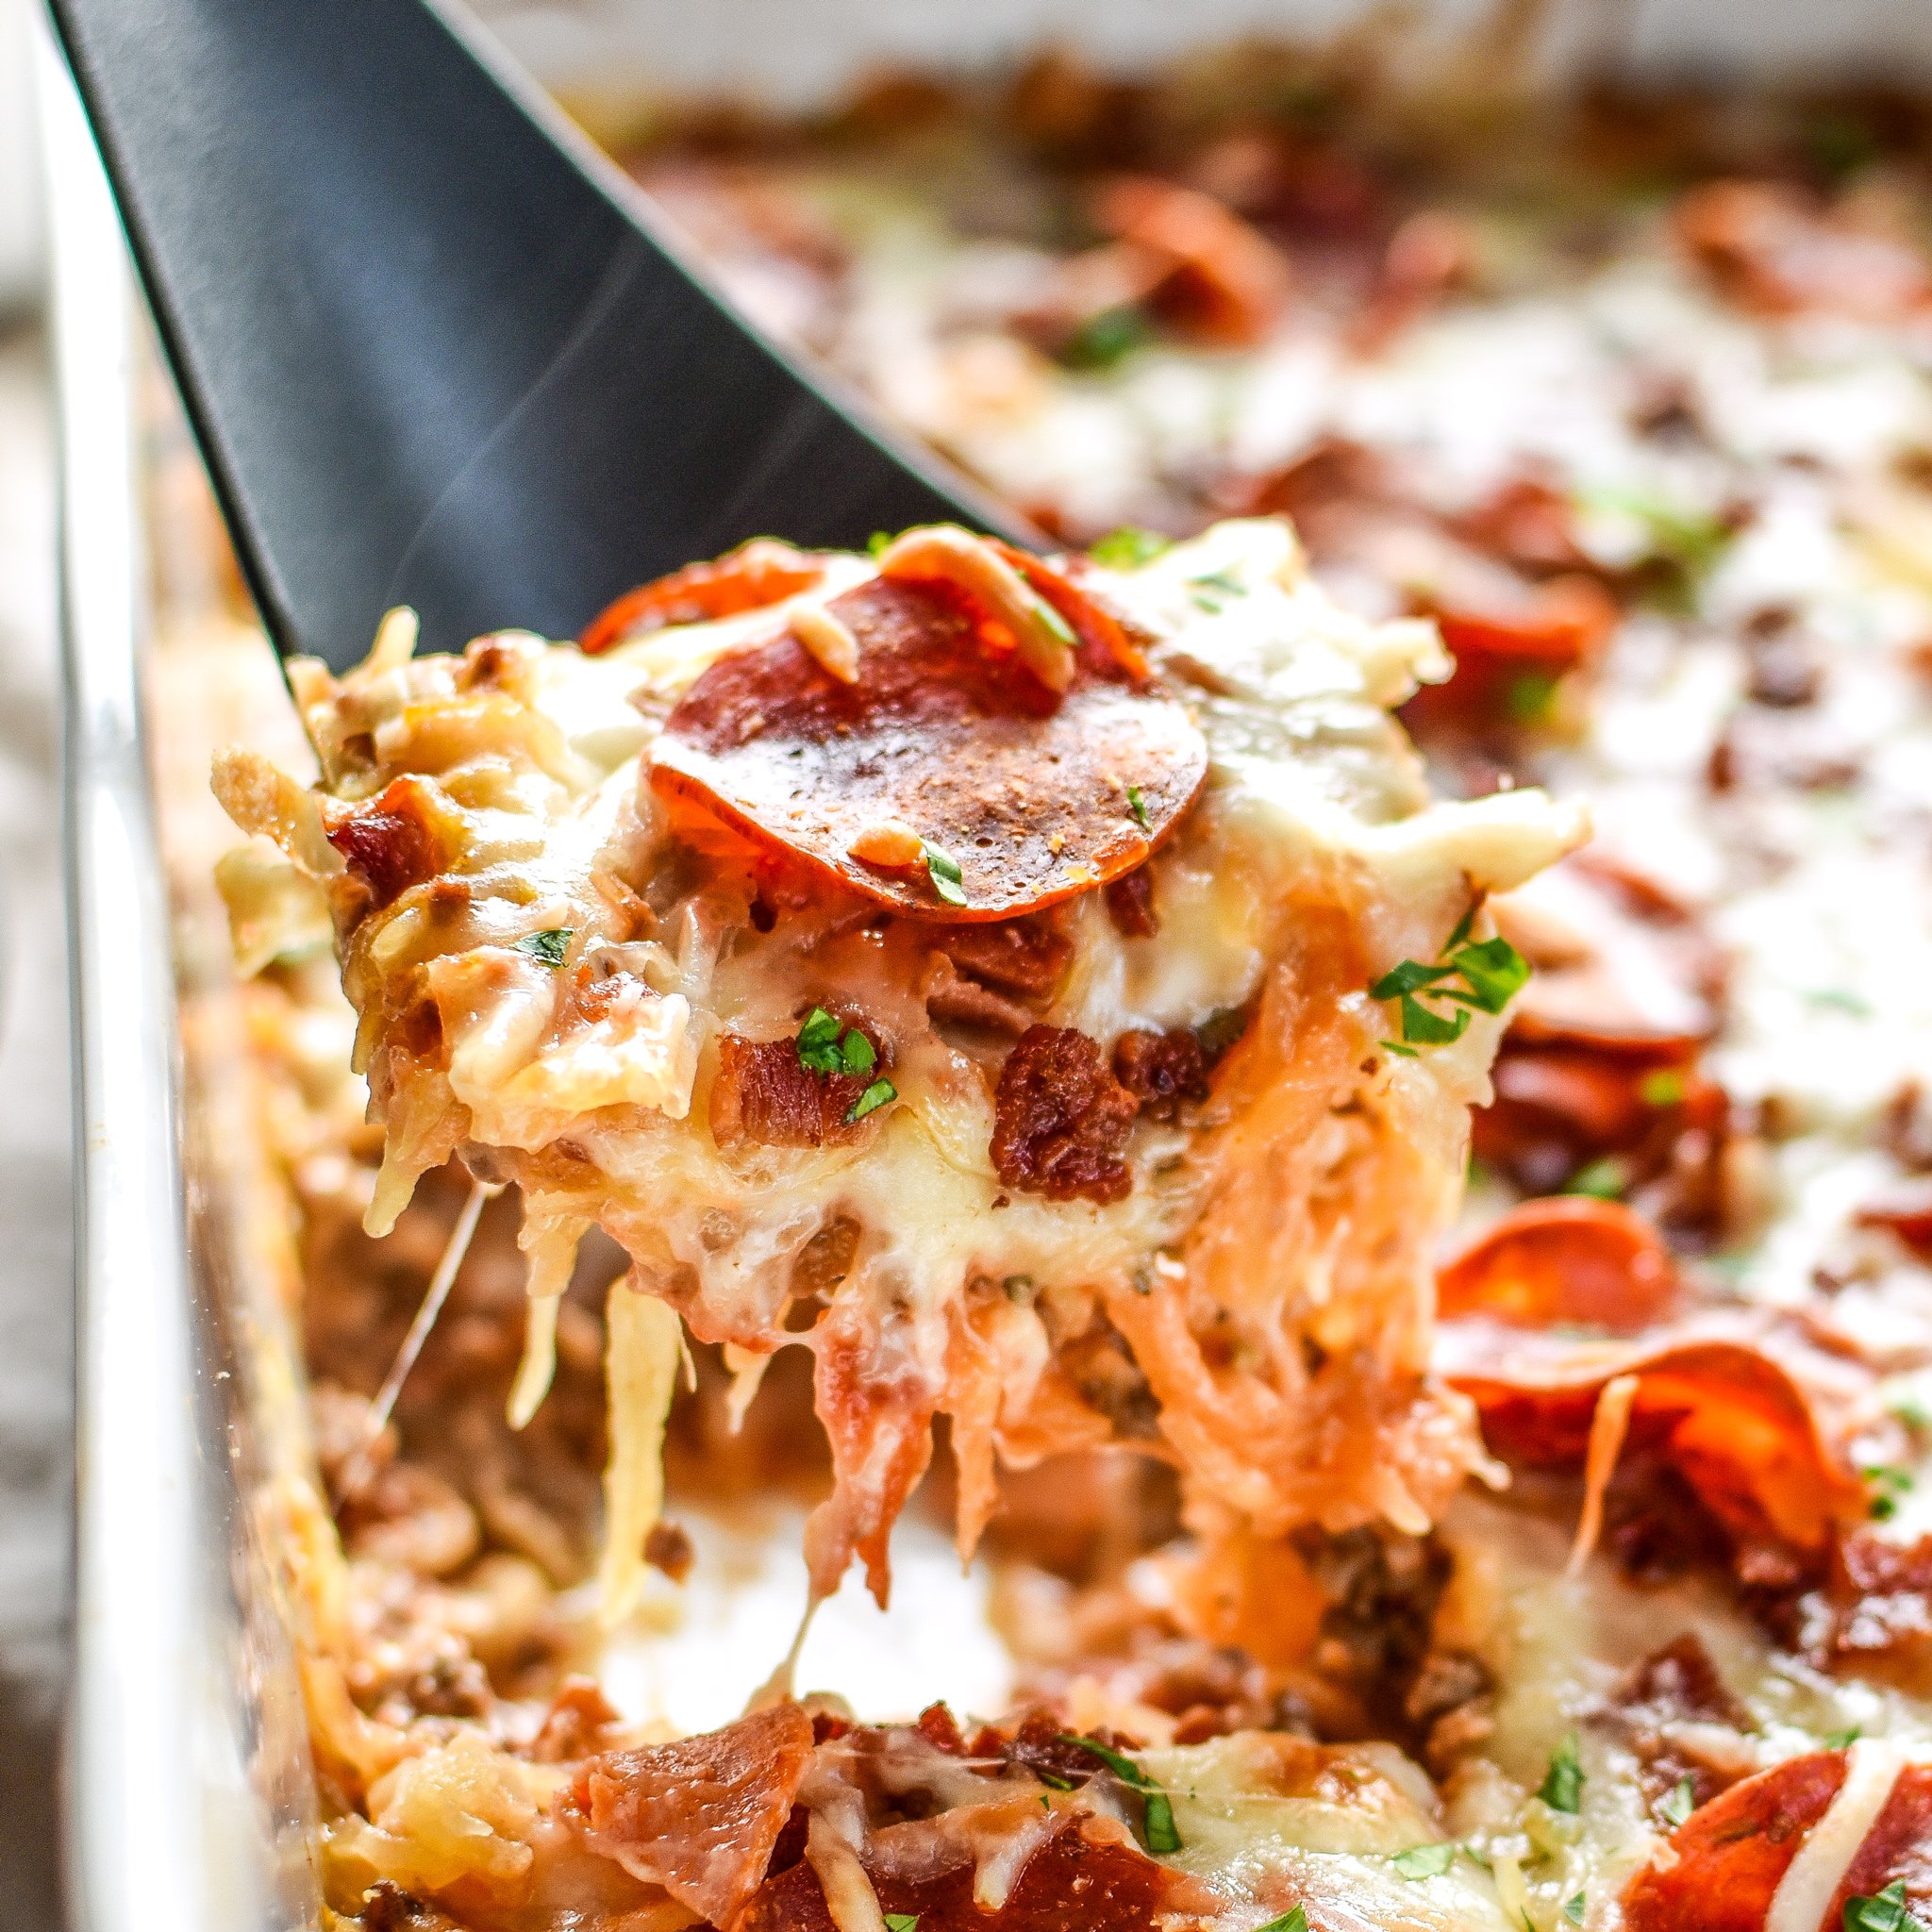 The best shot of Meat Lover's Spaghetti Squash Pizza Casserole - It's pizza, but morphed into a not-that-bad-for-you spaghetti squash casserole with meat lover's toppings! - ProjectMealPlan.com